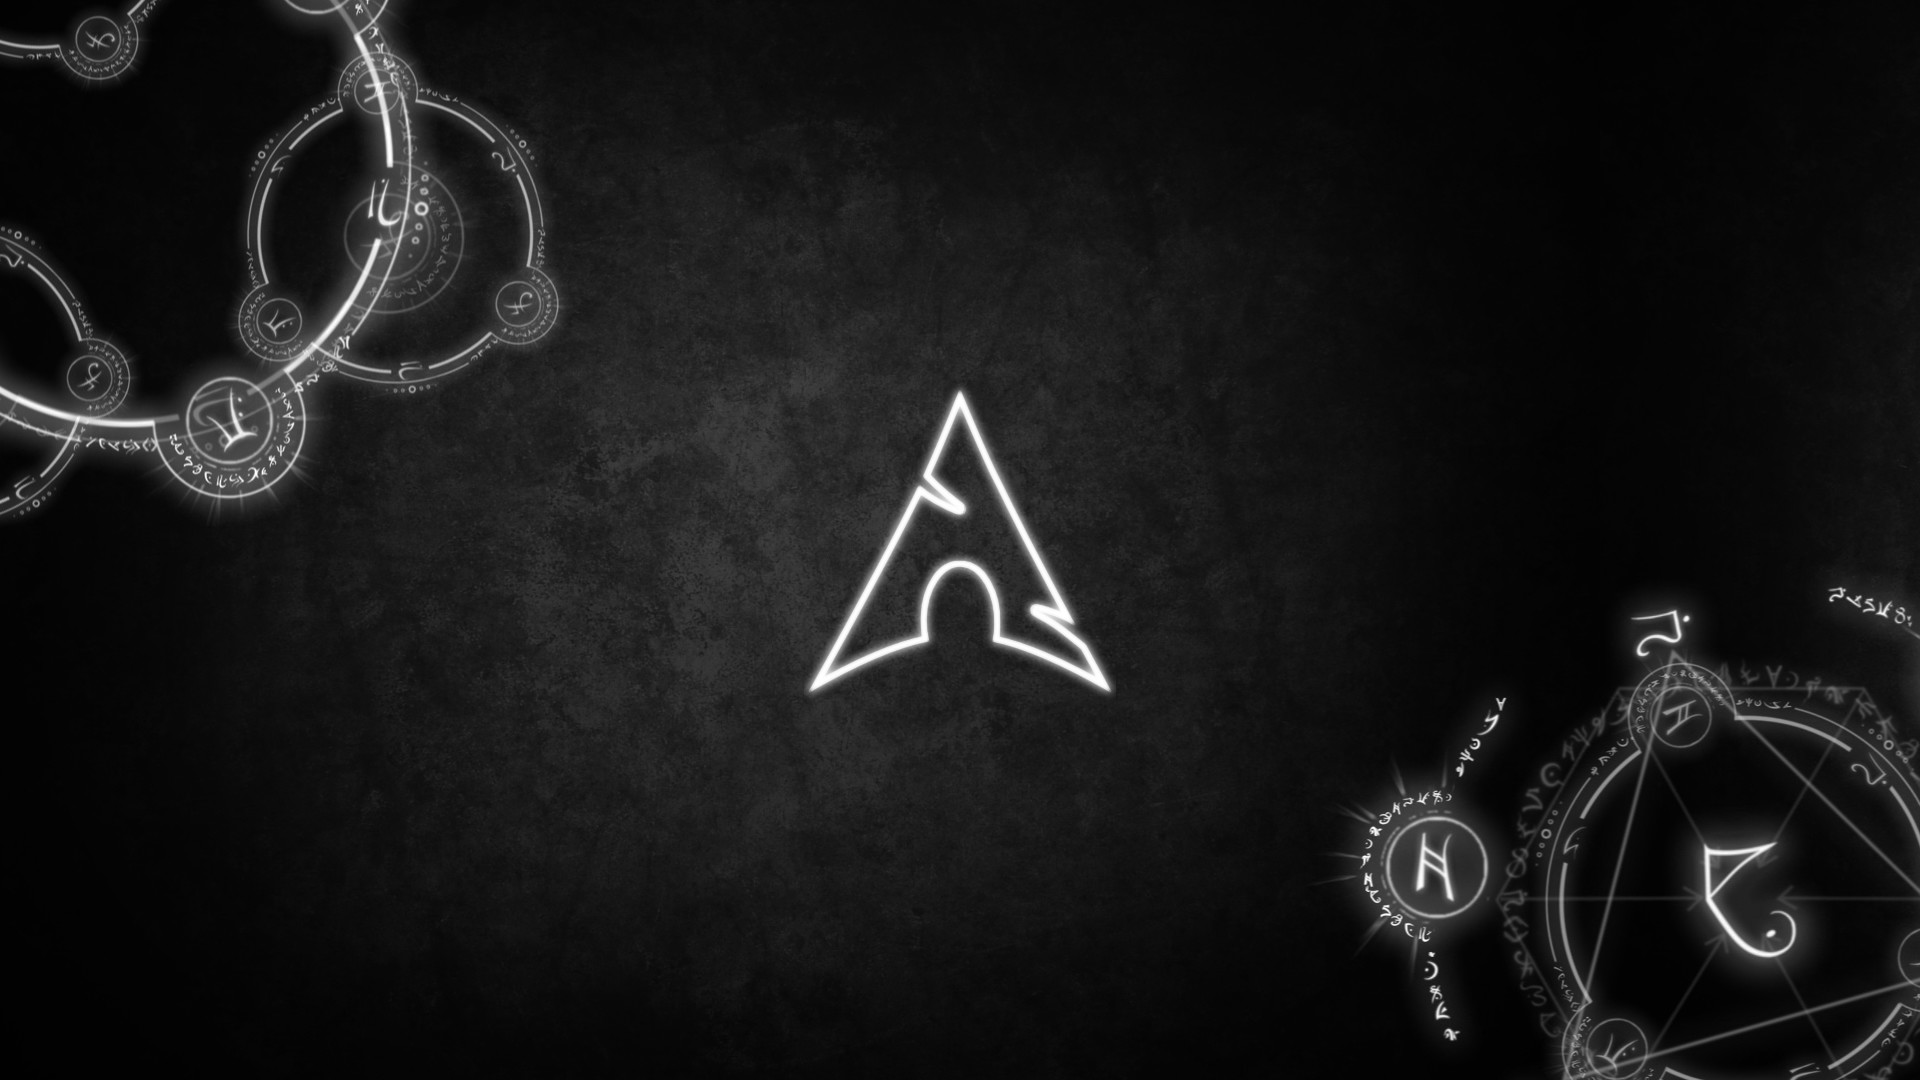 1920x1080 Some Arch wallpapers I made archlinux